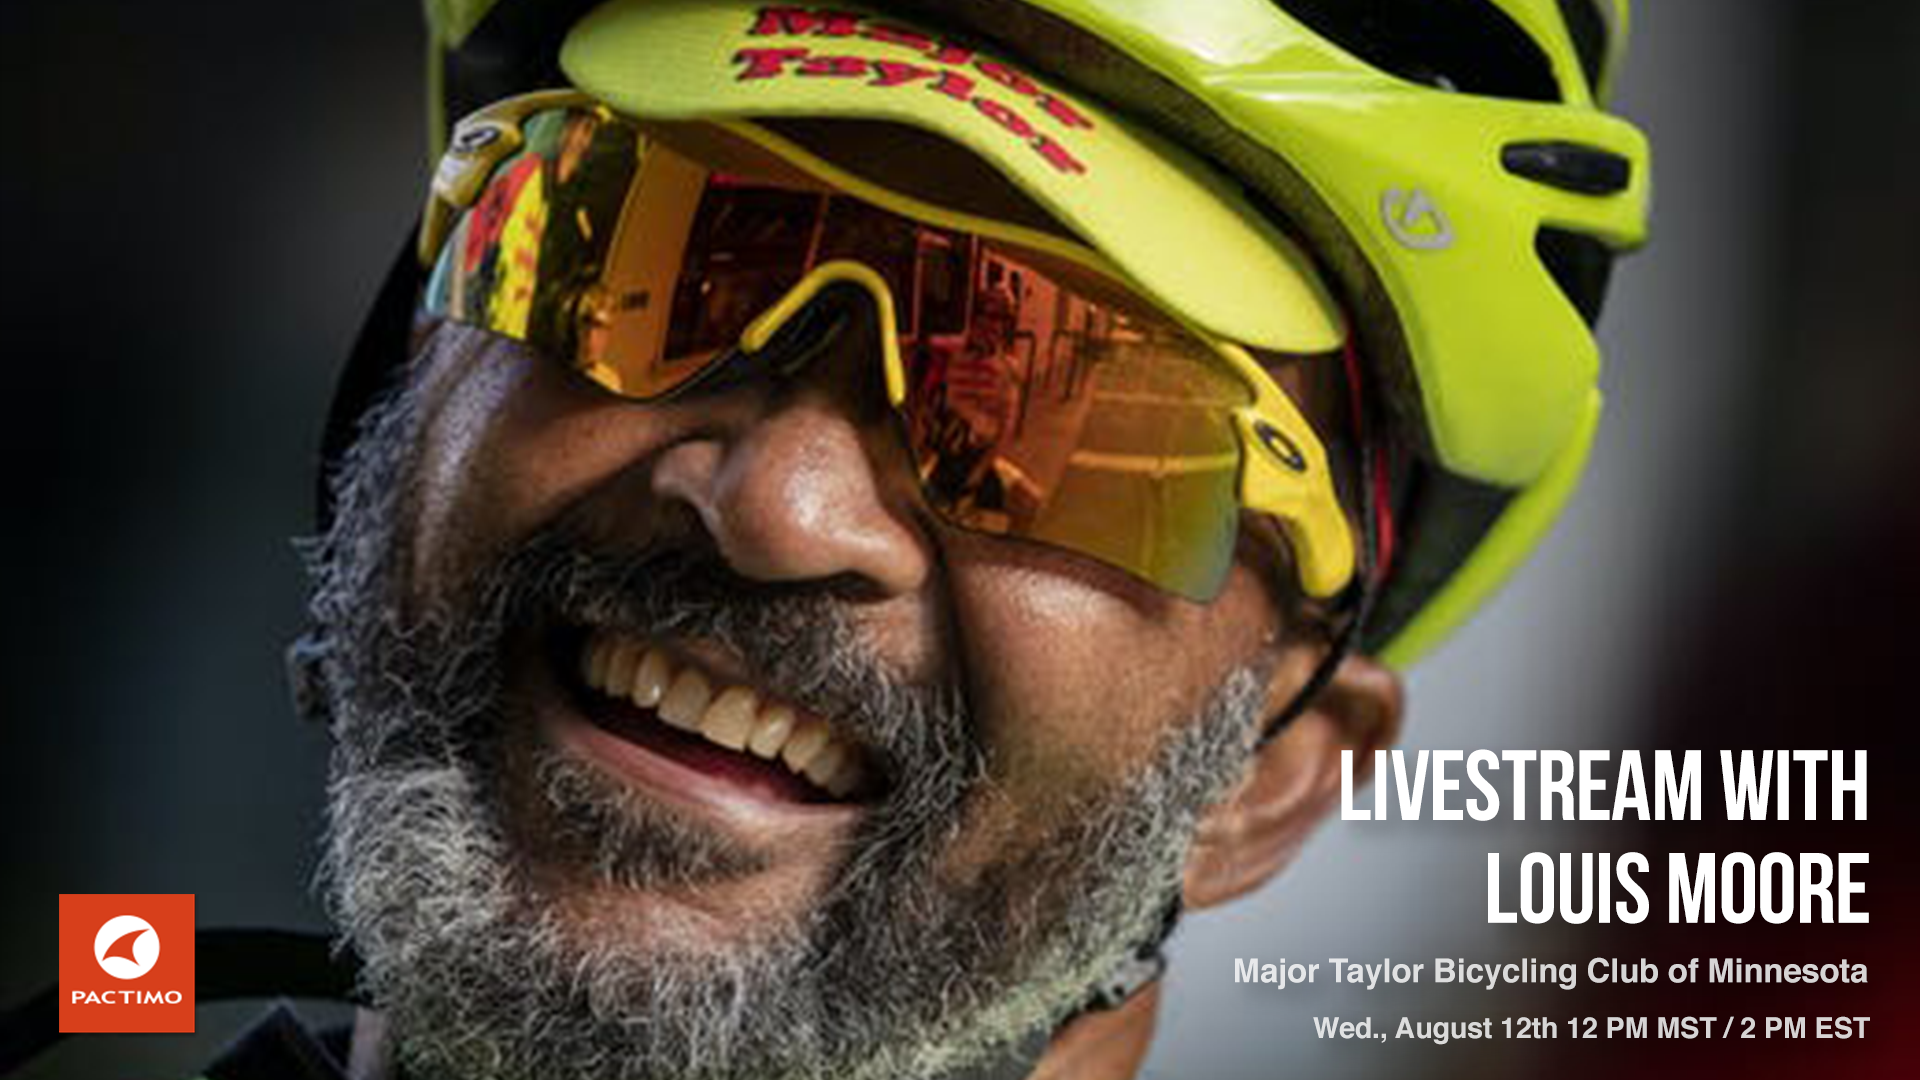 Livestream Replay: Louis Moore, founder of the Major Taylor Bicycling Club of Minnesota